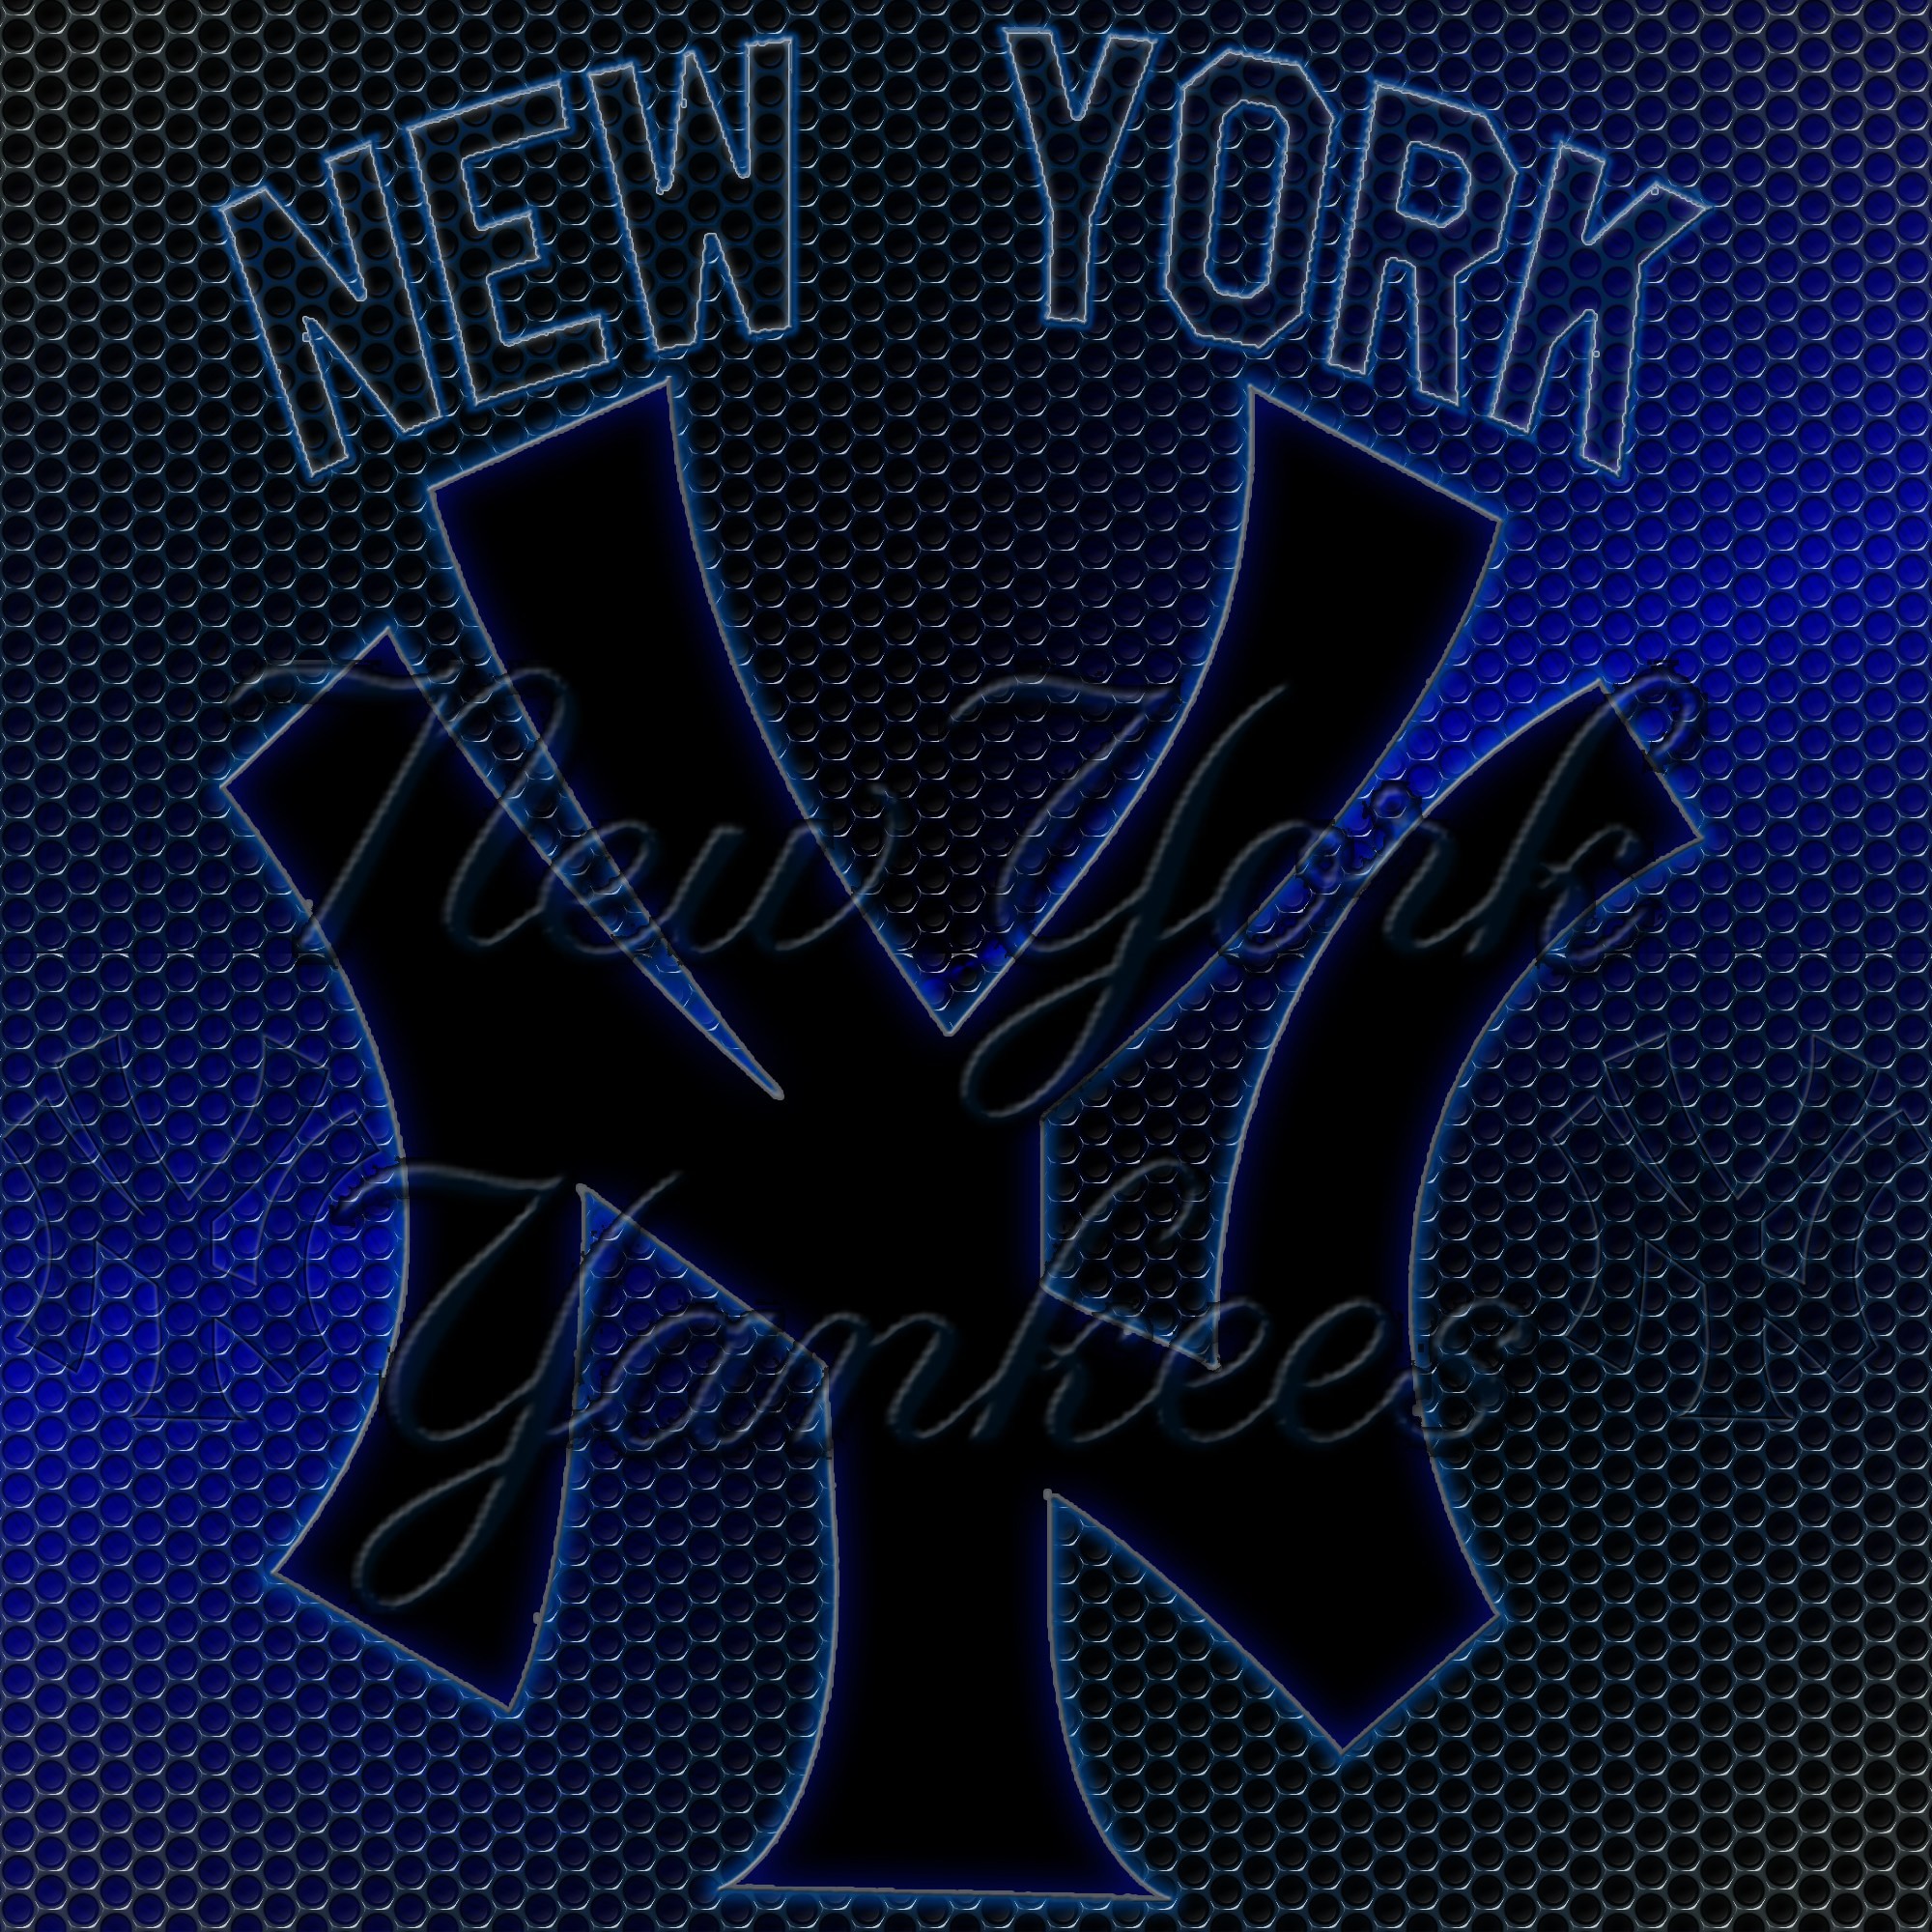 2000x2000 Perfect New York Yankees Symbol Wallpaper Download free wallpapers and  desktop backgrounds in a variety of